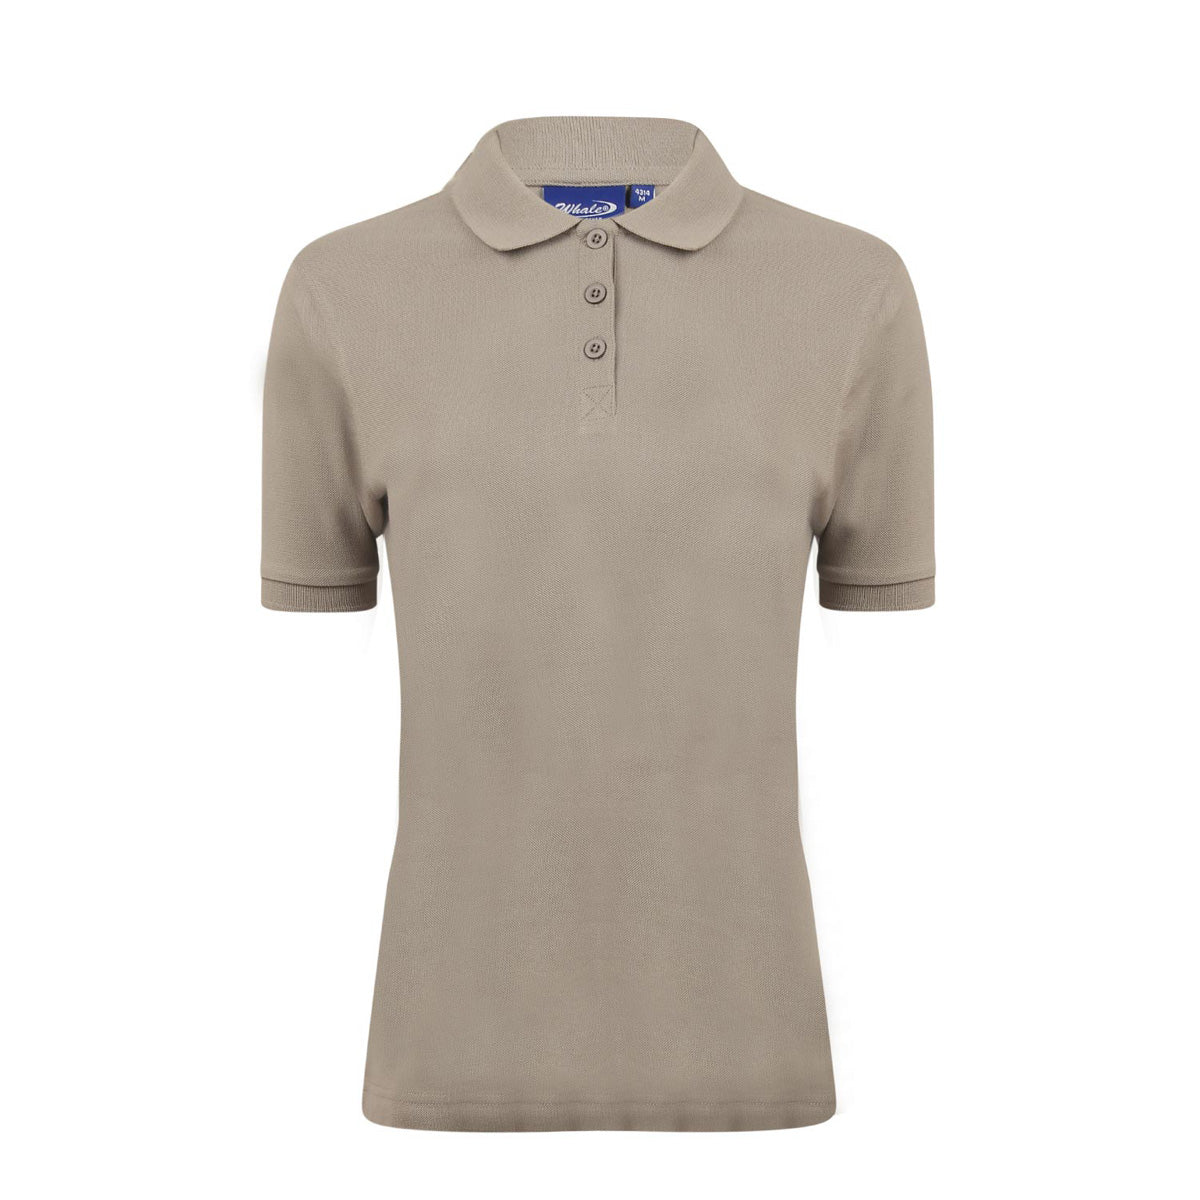 polo, polo shirt, polo store, ralphlauren, polo t shirts, golf polo, golf shirts, golf t shirt, polo shirt ladies, work outfit, outfits, beige polo